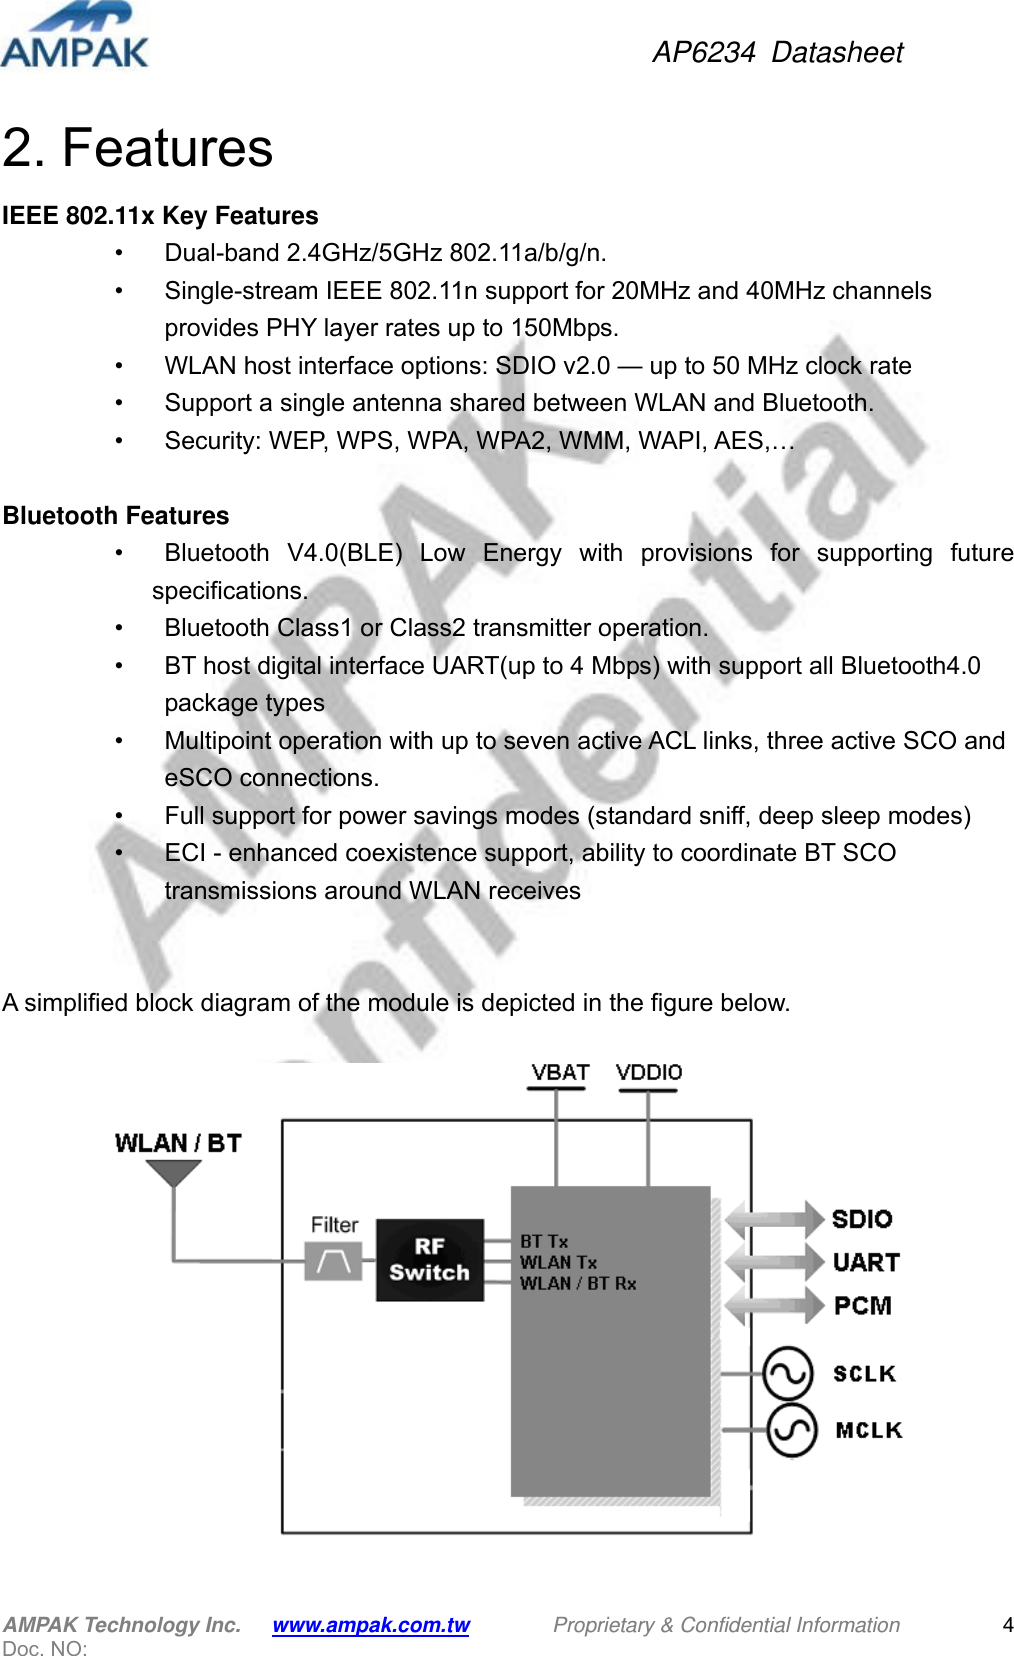 AP6234 Datasheet AMPAK Technology Inc.      www.ampak.com.tw        Proprietary &amp; Confidential Information       Doc. NO:   42. Features IEEE 802.11x Key Features •    Dual-band 2.4GHz/5GHz 802.11a/b/g/n. •    Single-stream IEEE 802.11n support for 20MHz and 40MHz channels   provides PHY layer rates up to 150Mbps. •    WLAN host interface options: SDIO v2.0 — up to 50 MHz clock rate •    Support a single antenna shared between WLAN and Bluetooth. •    Security: WEP, WPS, WPA, WPA2, WMM, WAPI, AES,…    Bluetooth Features •   Bluetooth V4.0(BLE) Low Energy with provisions for supporting future specifications. •    Bluetooth Class1 or Class2 transmitter operation. •    BT host digital interface UART(up to 4 Mbps) with support all Bluetooth4.0   package types •    Multipoint operation with up to seven active ACL links, three active SCO and   eSCO connections.   •    Full support for power savings modes (standard sniff, deep sleep modes) •    ECI - enhanced coexistence support, ability to coordinate BT SCO   transmissions around WLAN receives     A simplified block diagram of the module is depicted in the figure below.   